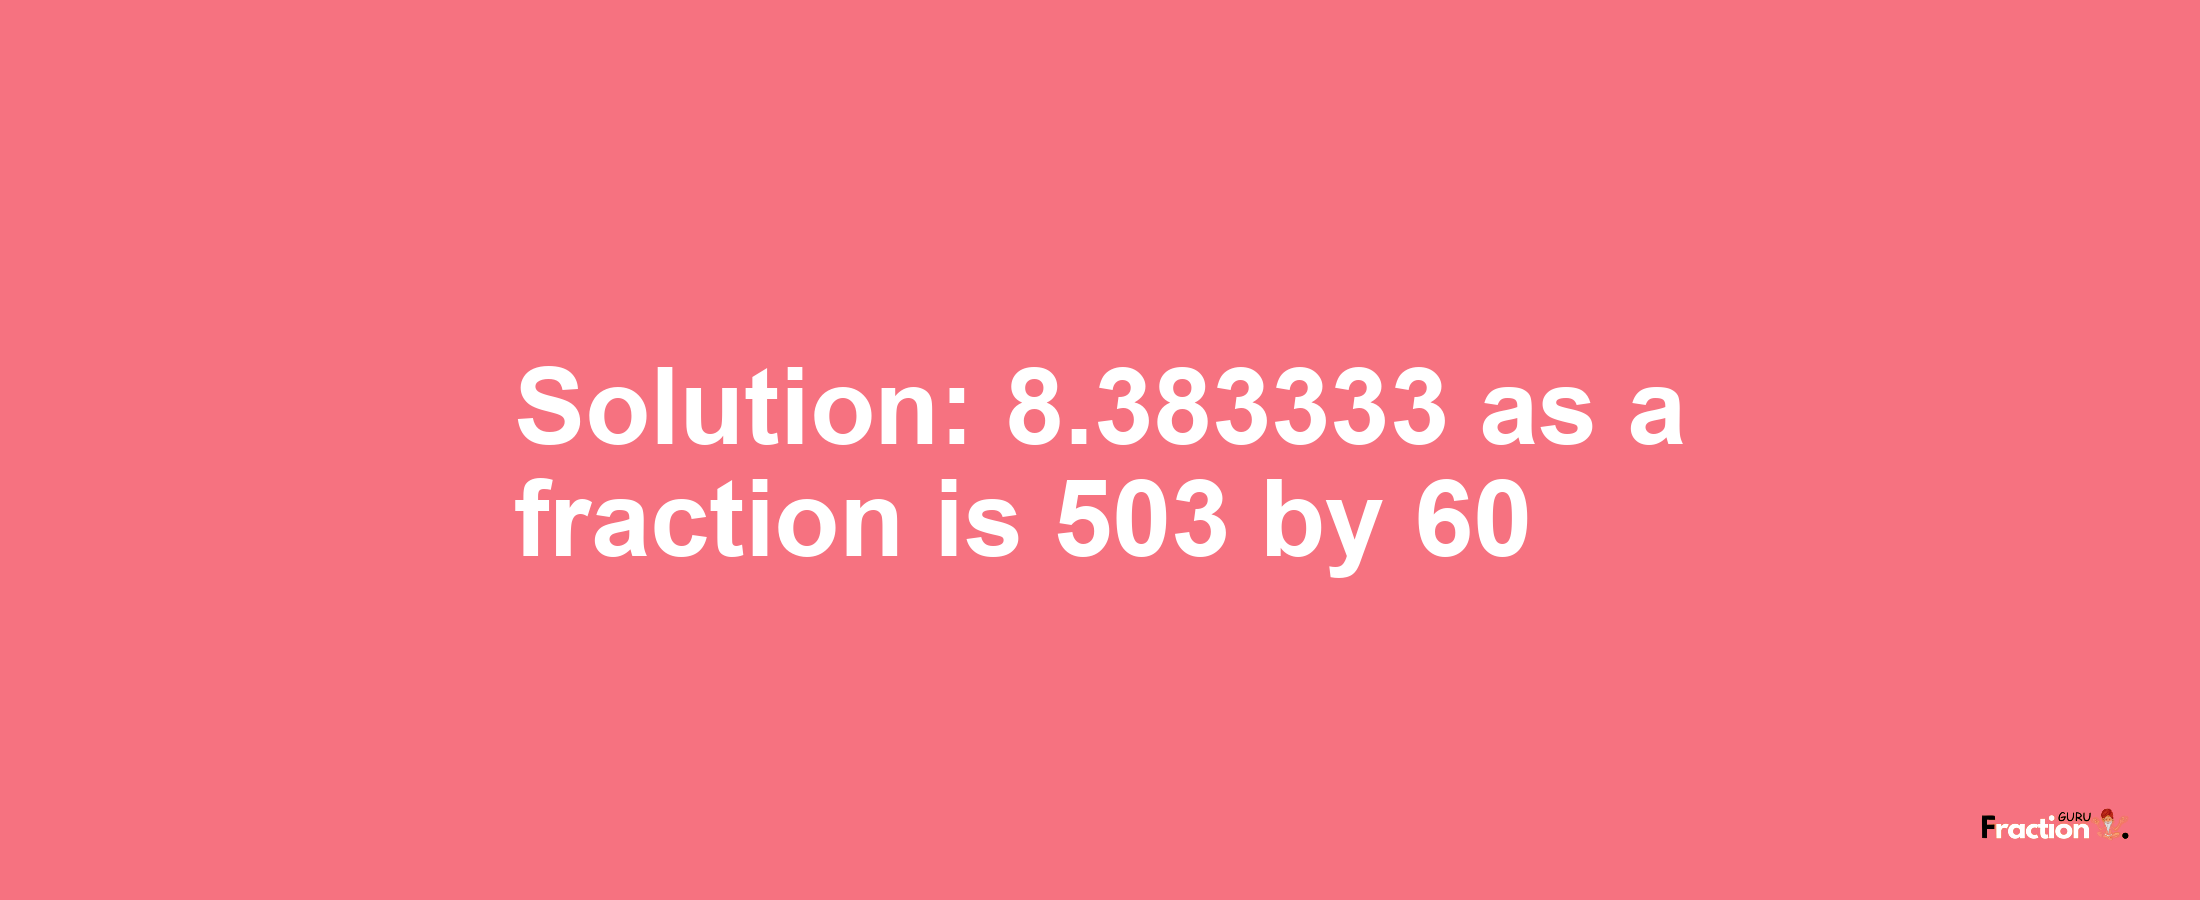 Solution:8.383333 as a fraction is 503/60